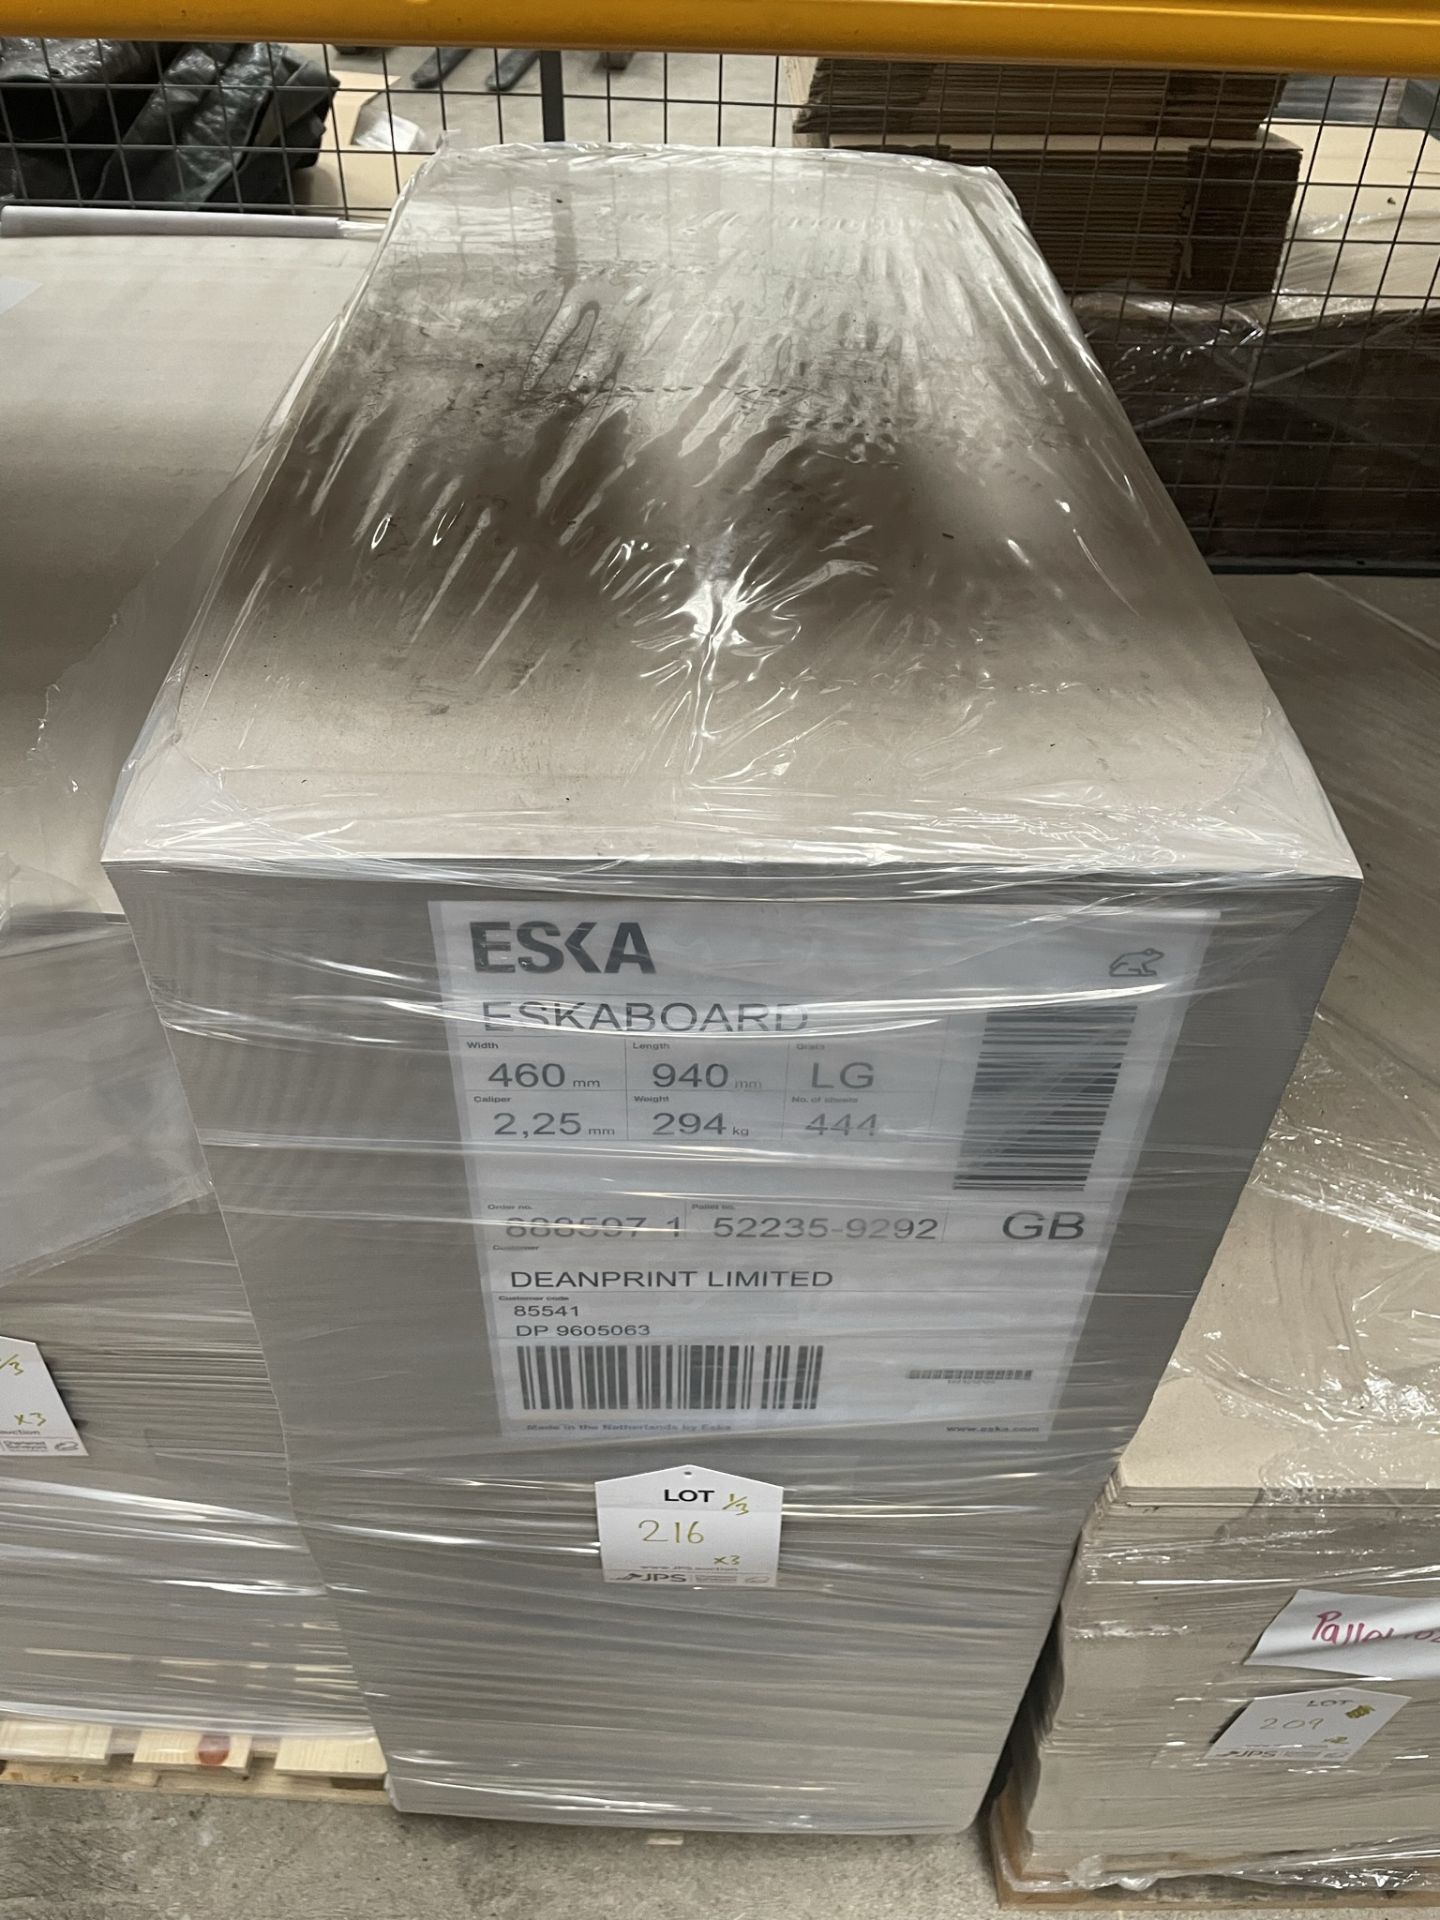 3 x Pallets of 2250 Micron Eskaboard | Approximately 1,288 Sheets | 460 x 940cm - Image 2 of 6